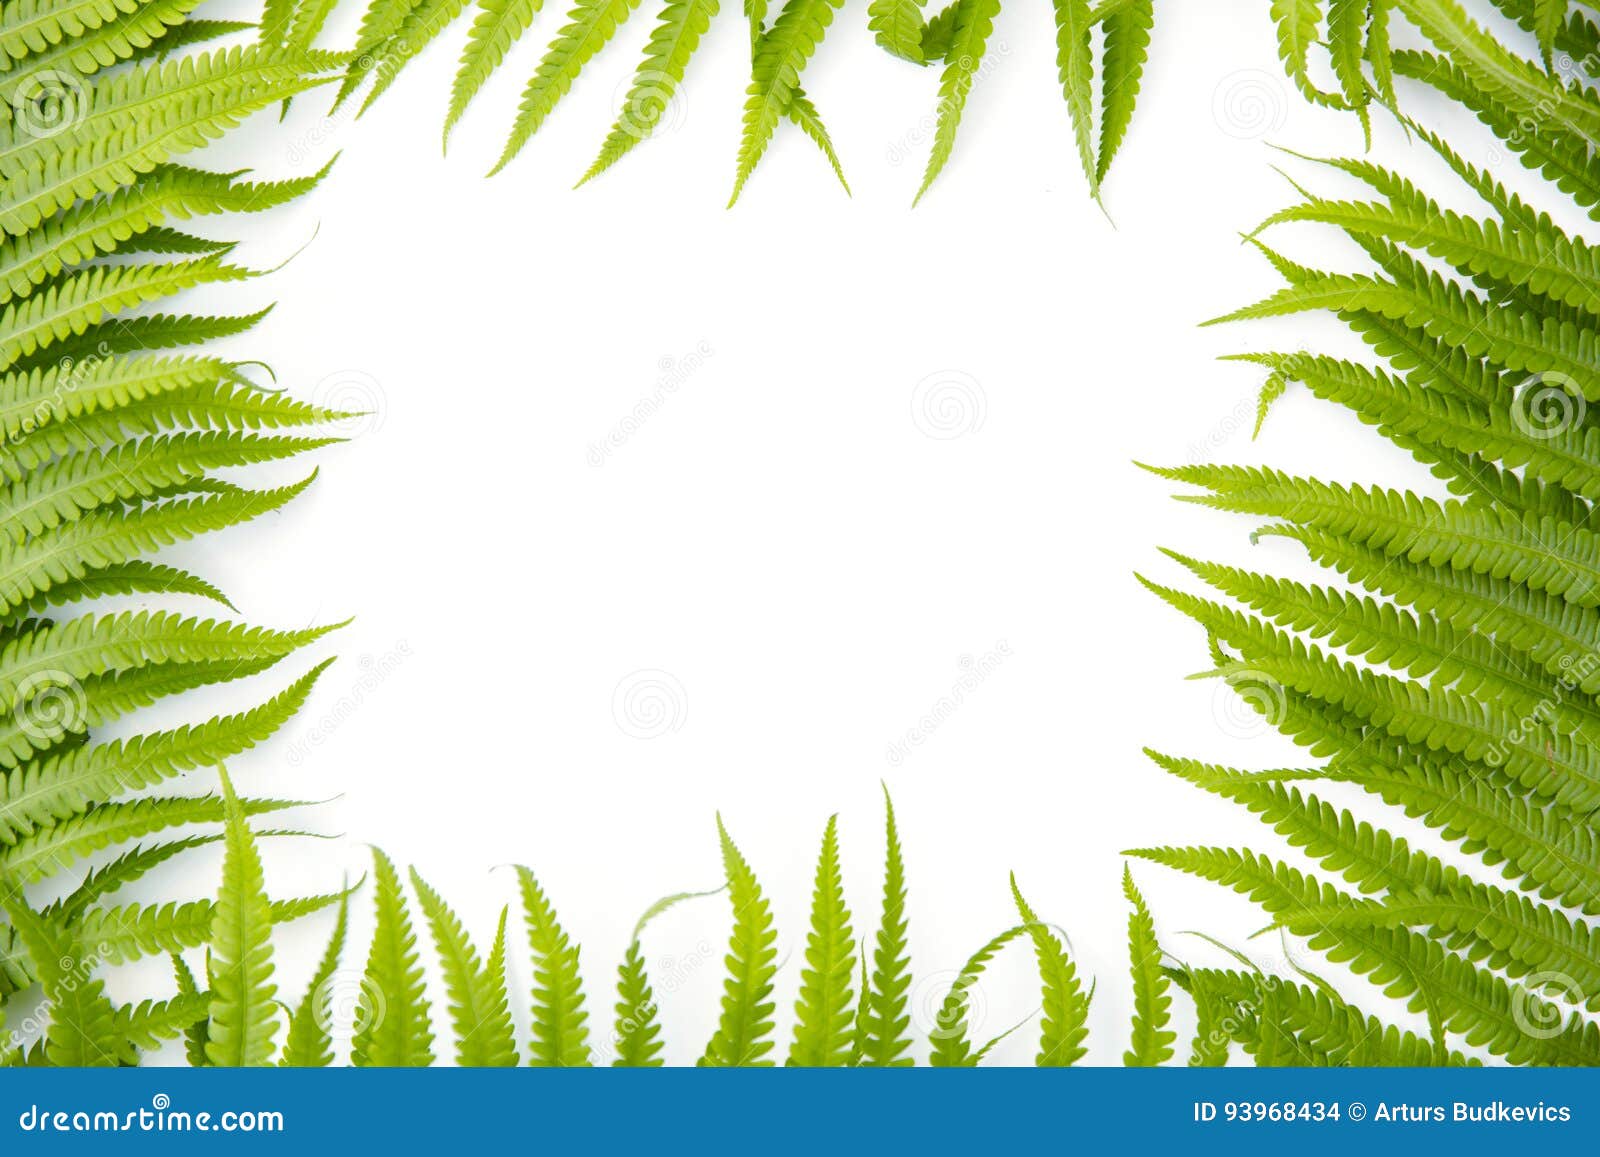 fern polypody adder`s tongue plant as frame on white background, space for text, nature greeting card